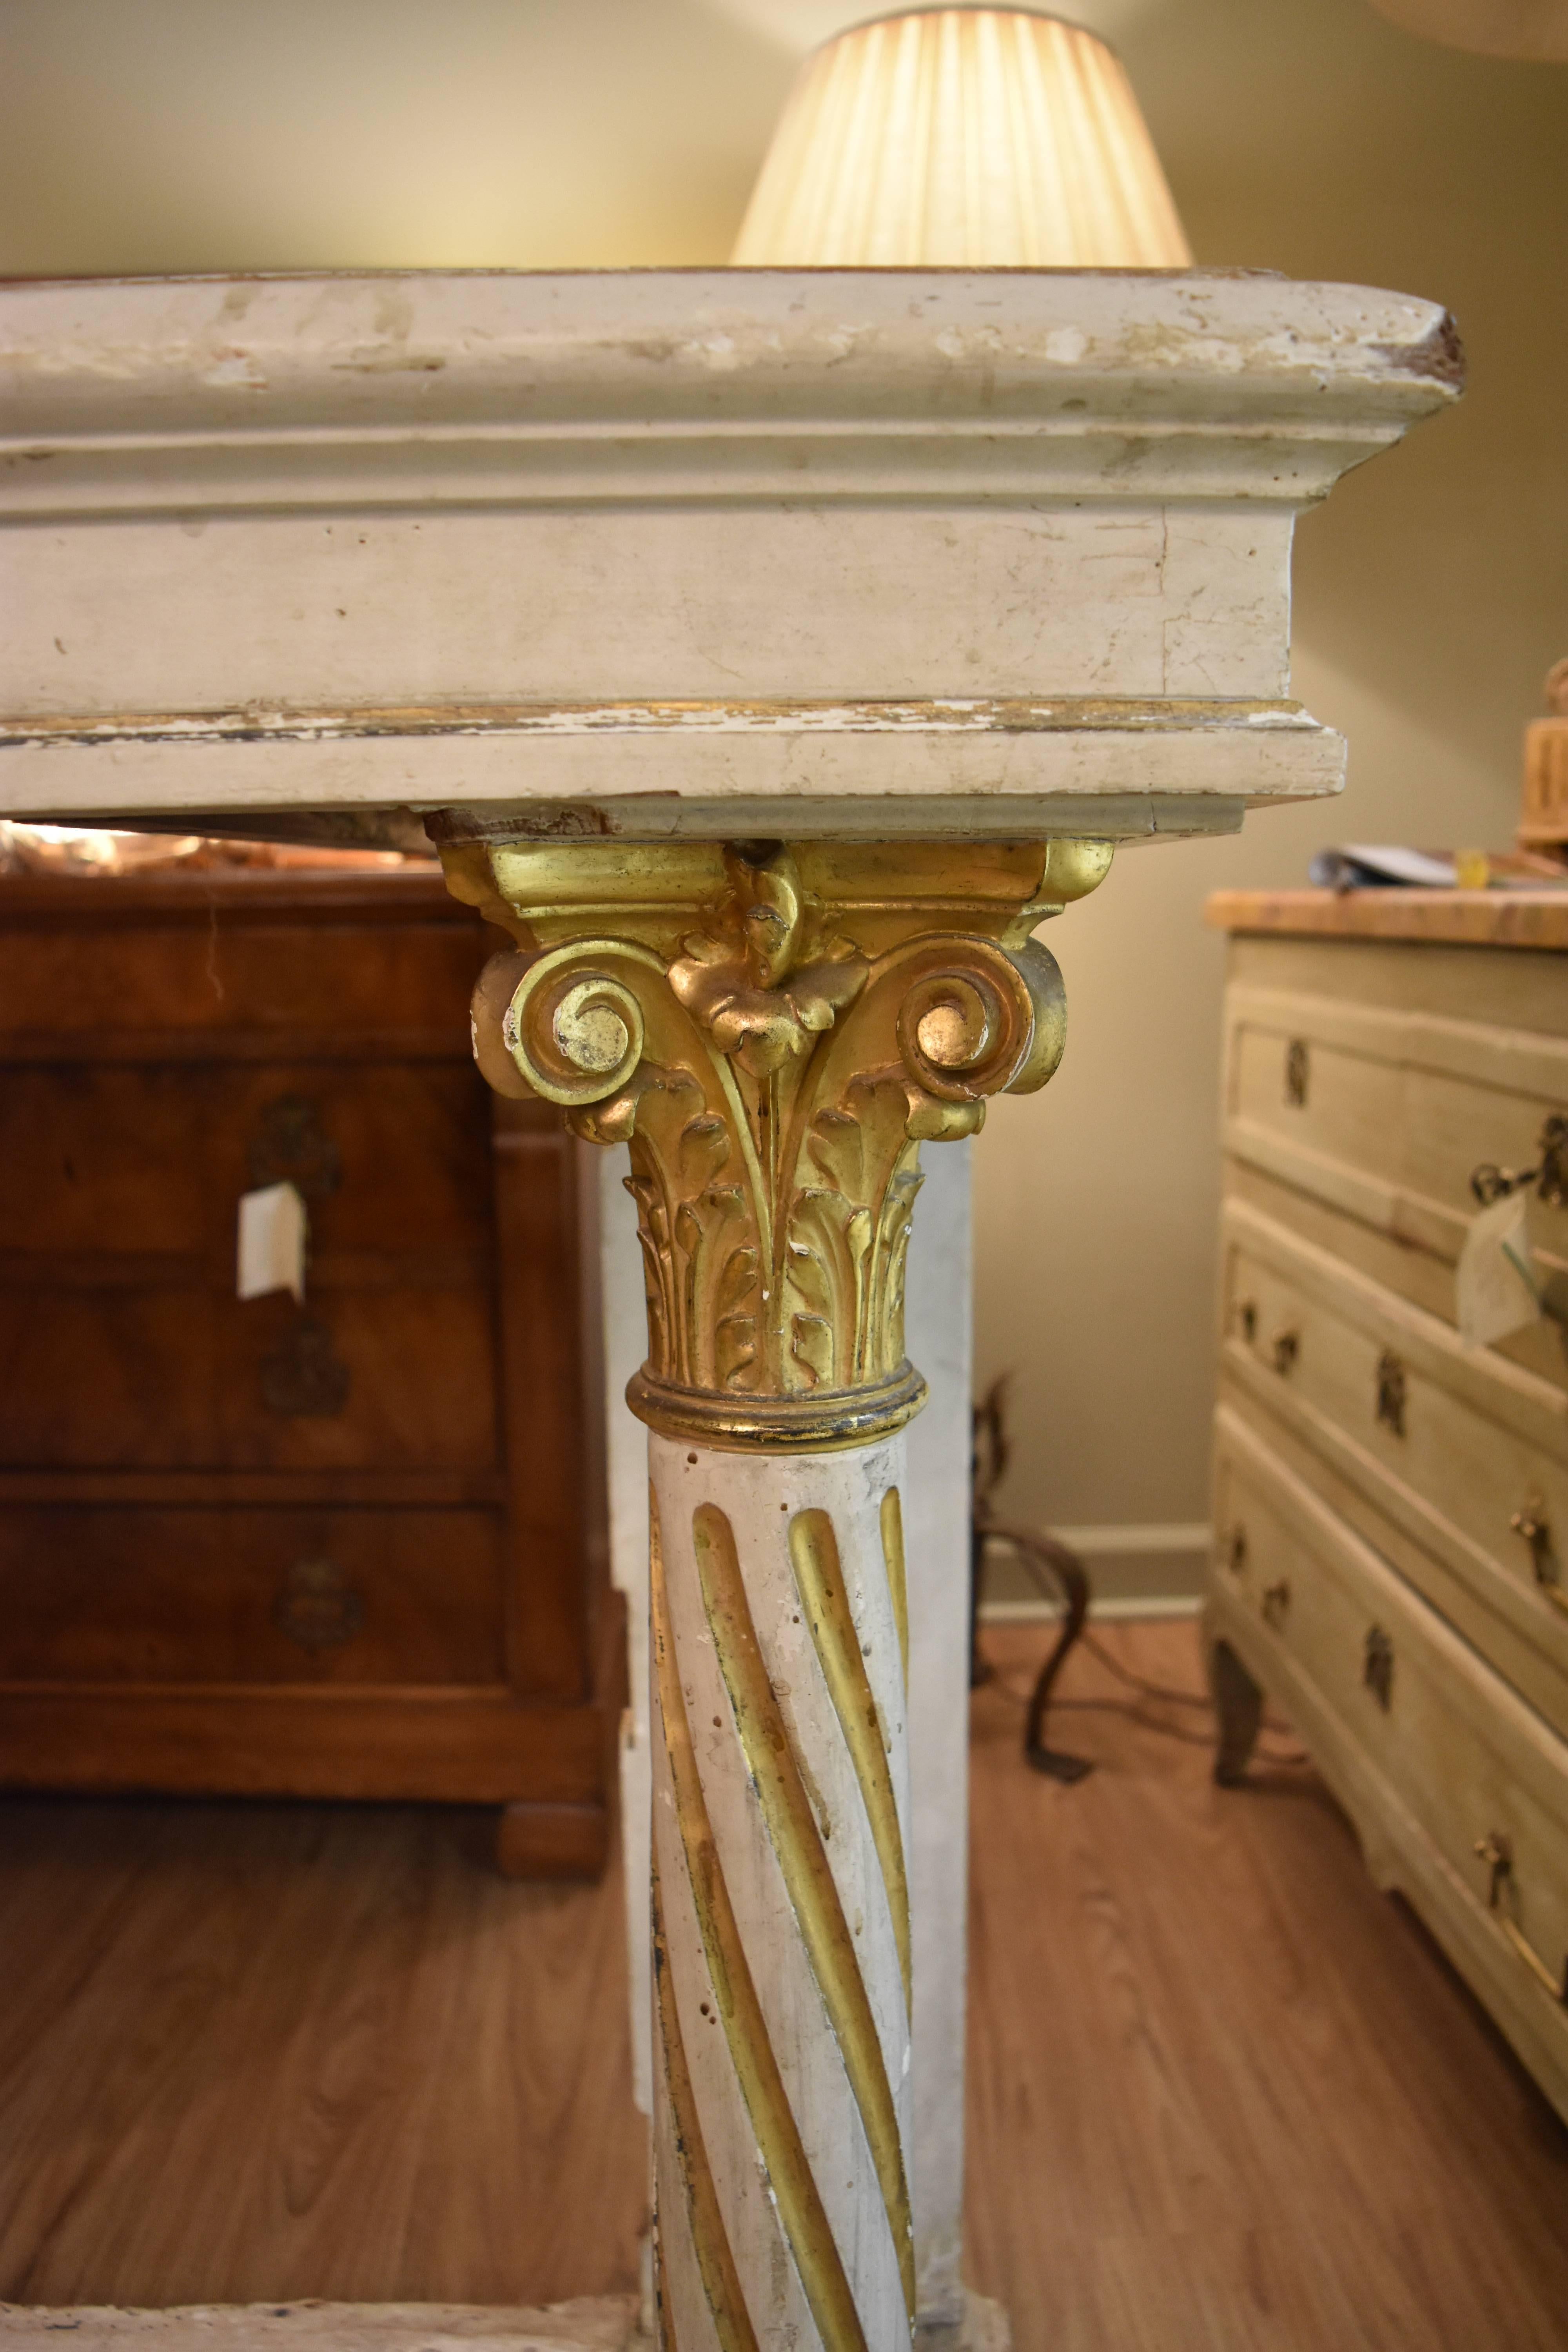 This 19th century, Italian painted console is in the neoclassical style. The Corinthian column legs are mounted on a raised plinth base. The finish is a rustic creamy painted finish with gilt accents on the columns.